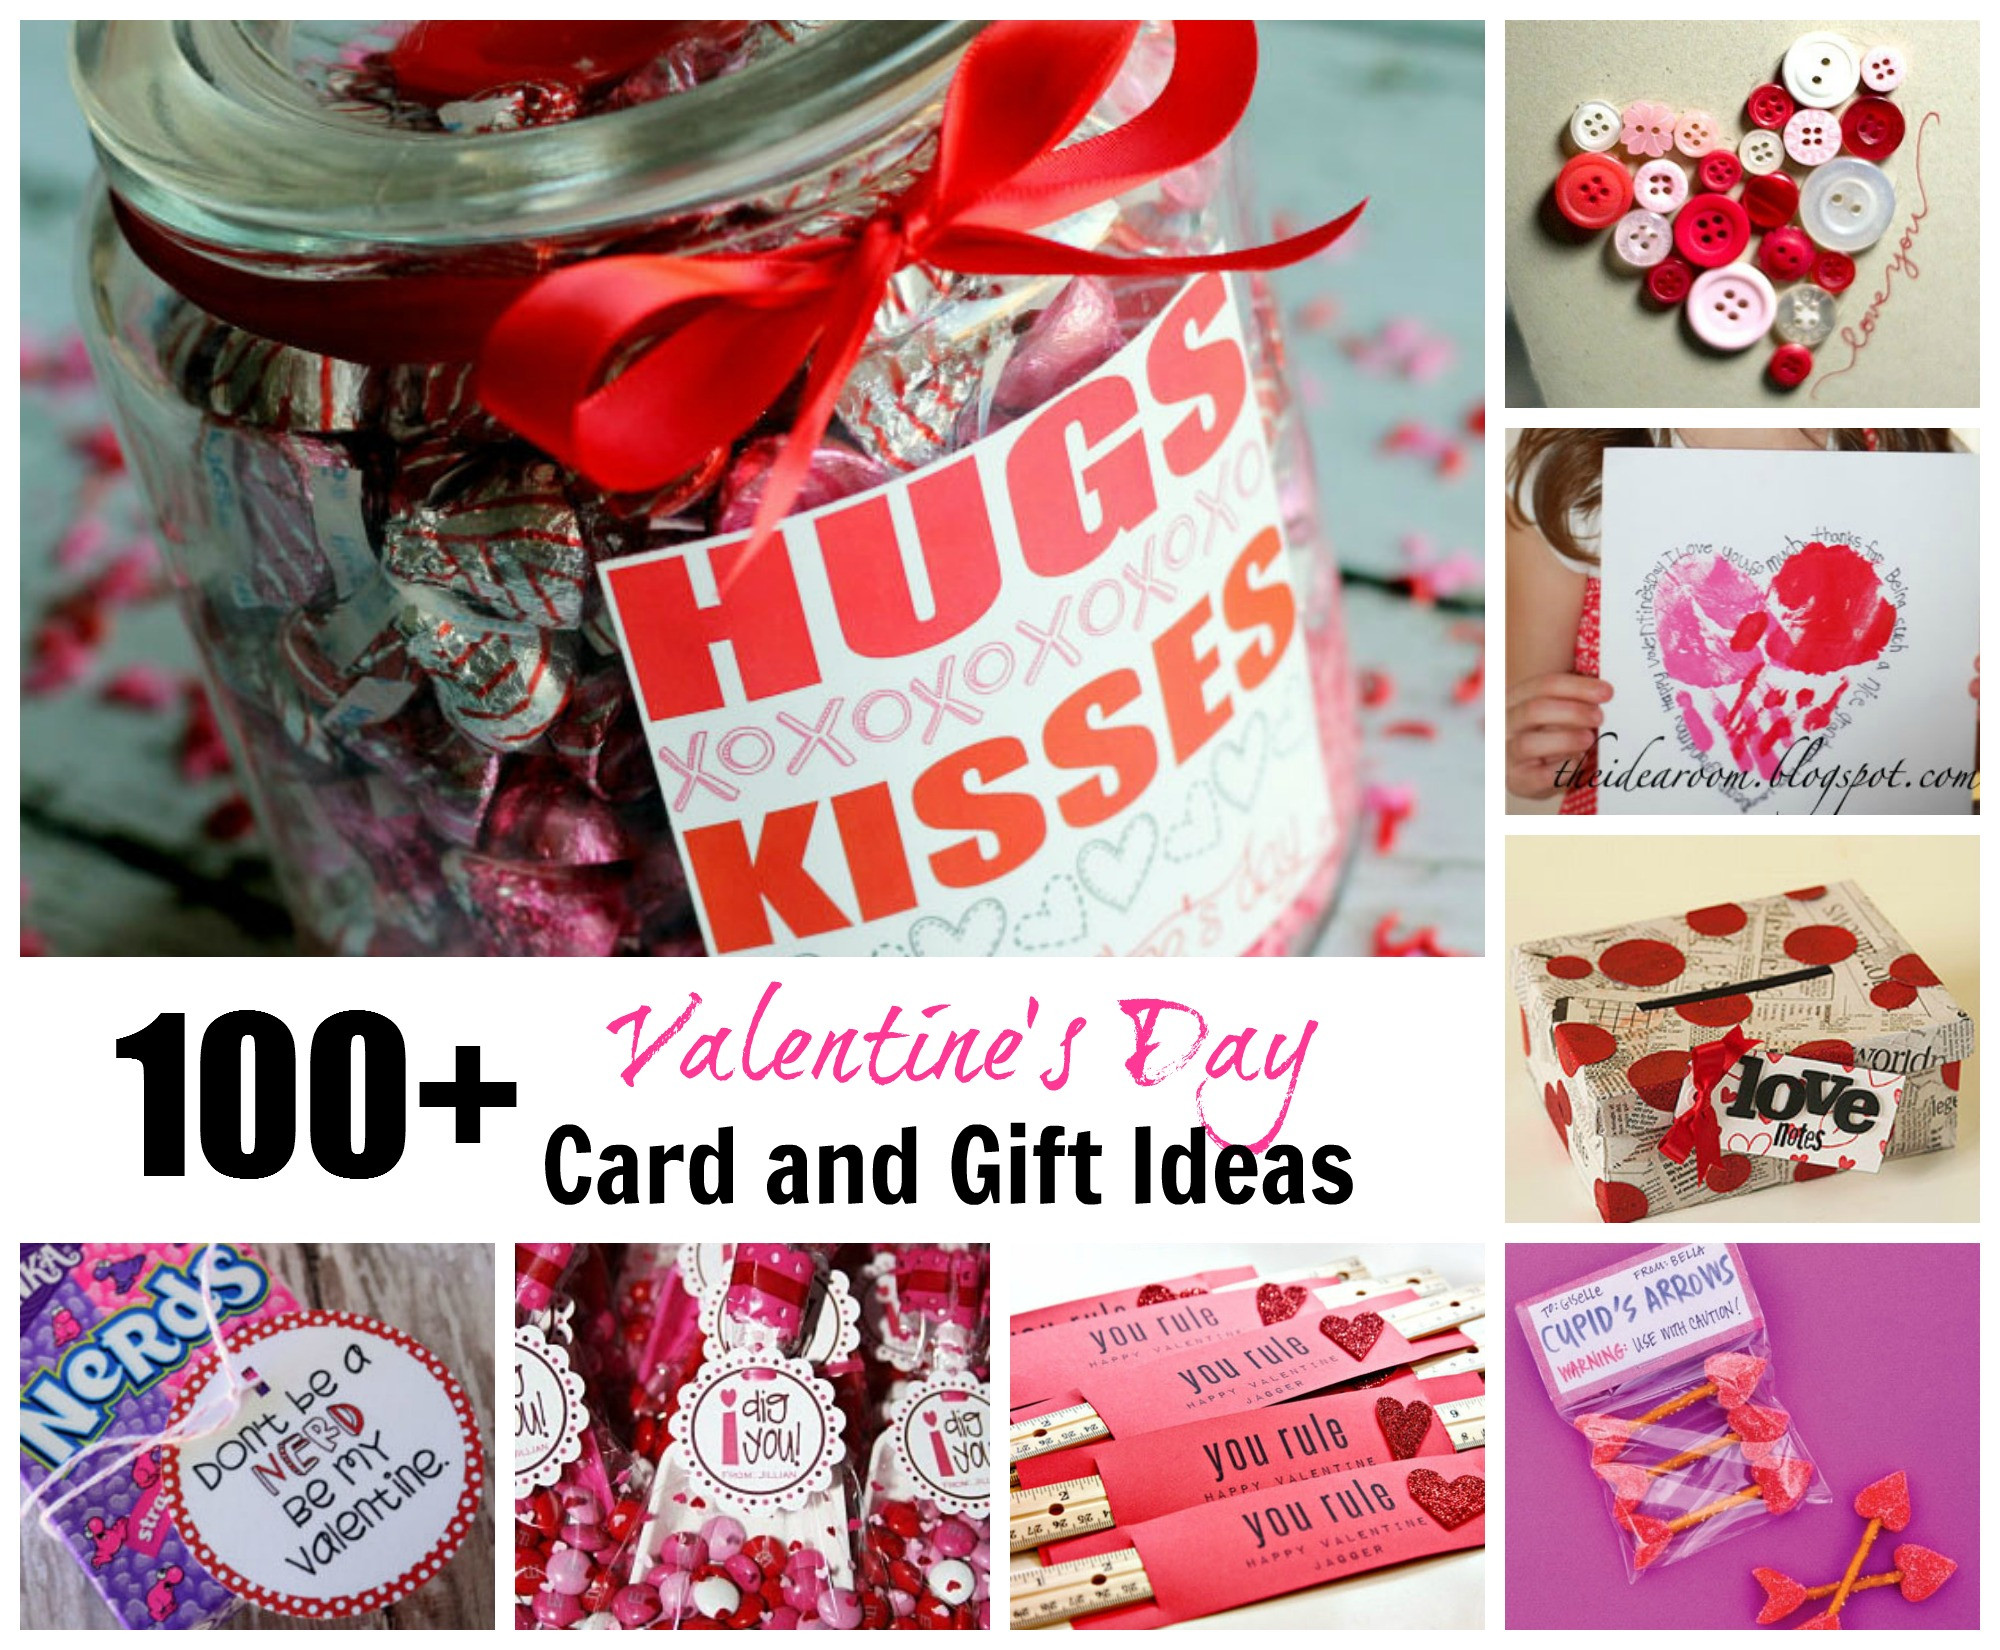 Home Made Gift Ideas For Valentines Day
 Classroom Valentine Ideas